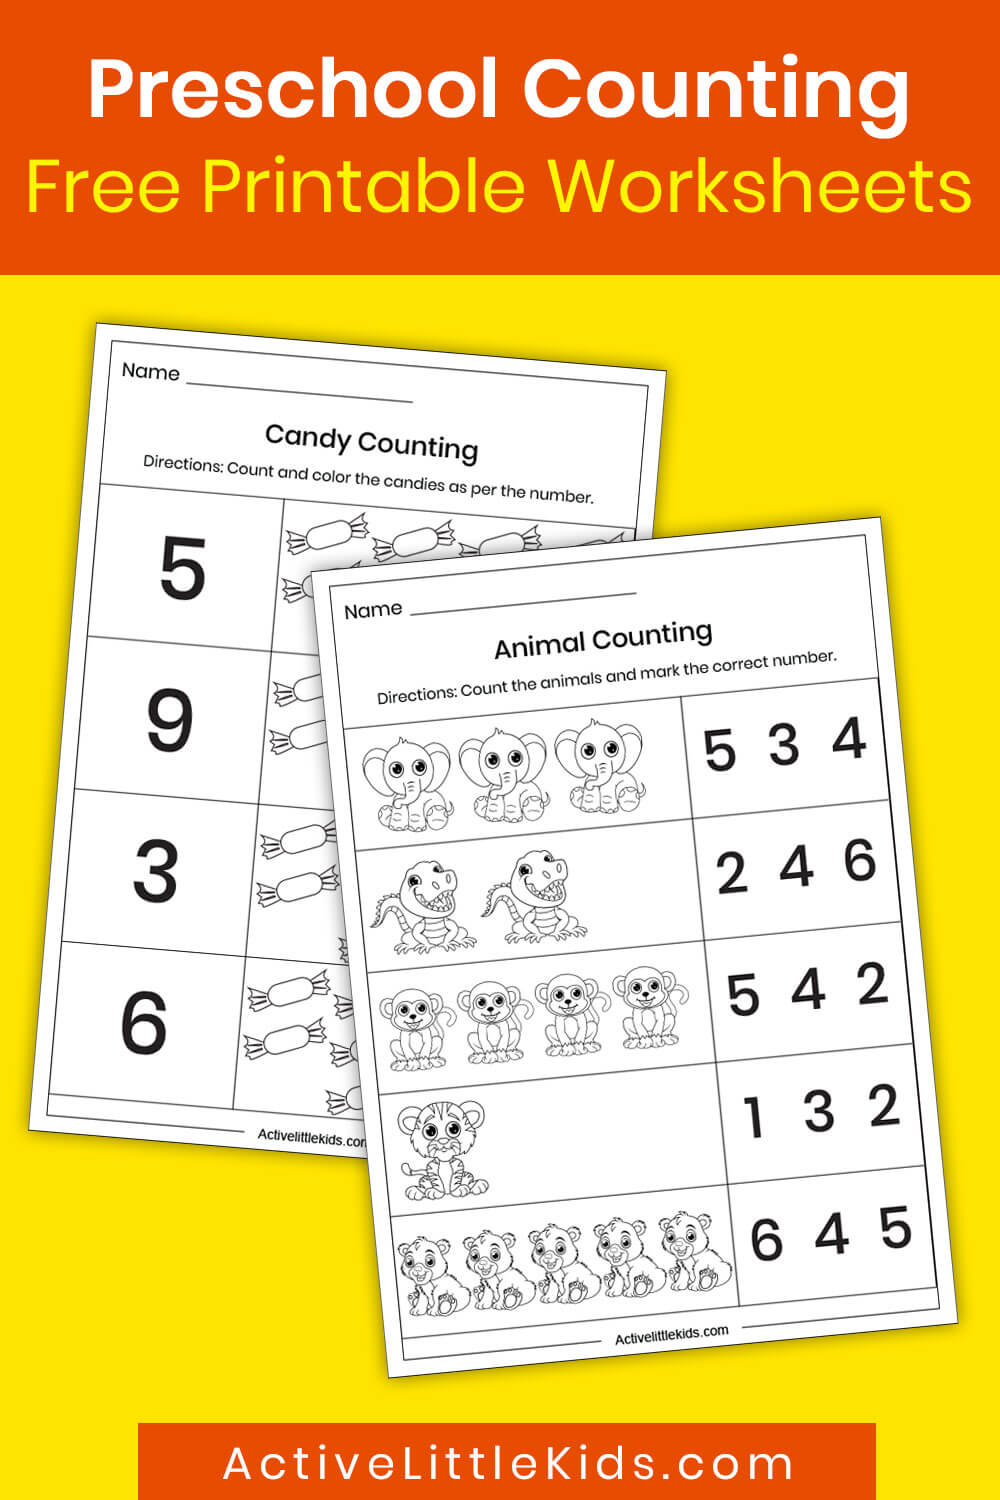 counting-worksheets-for-preschool-active-little-kids